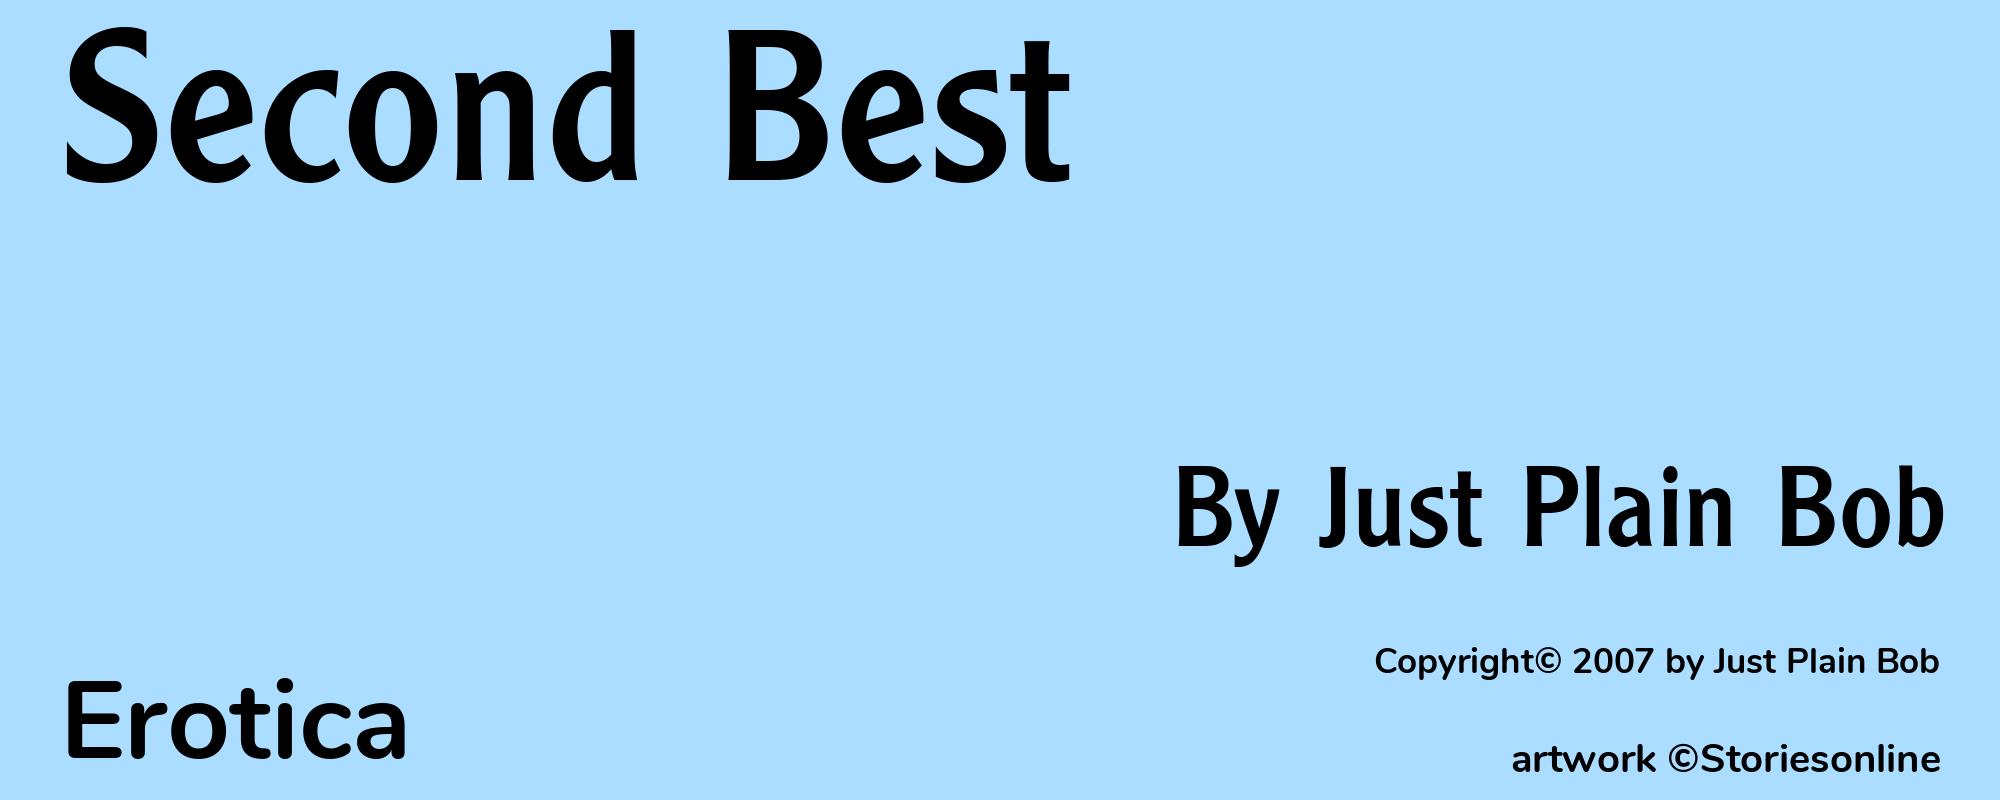 Second Best - Cover